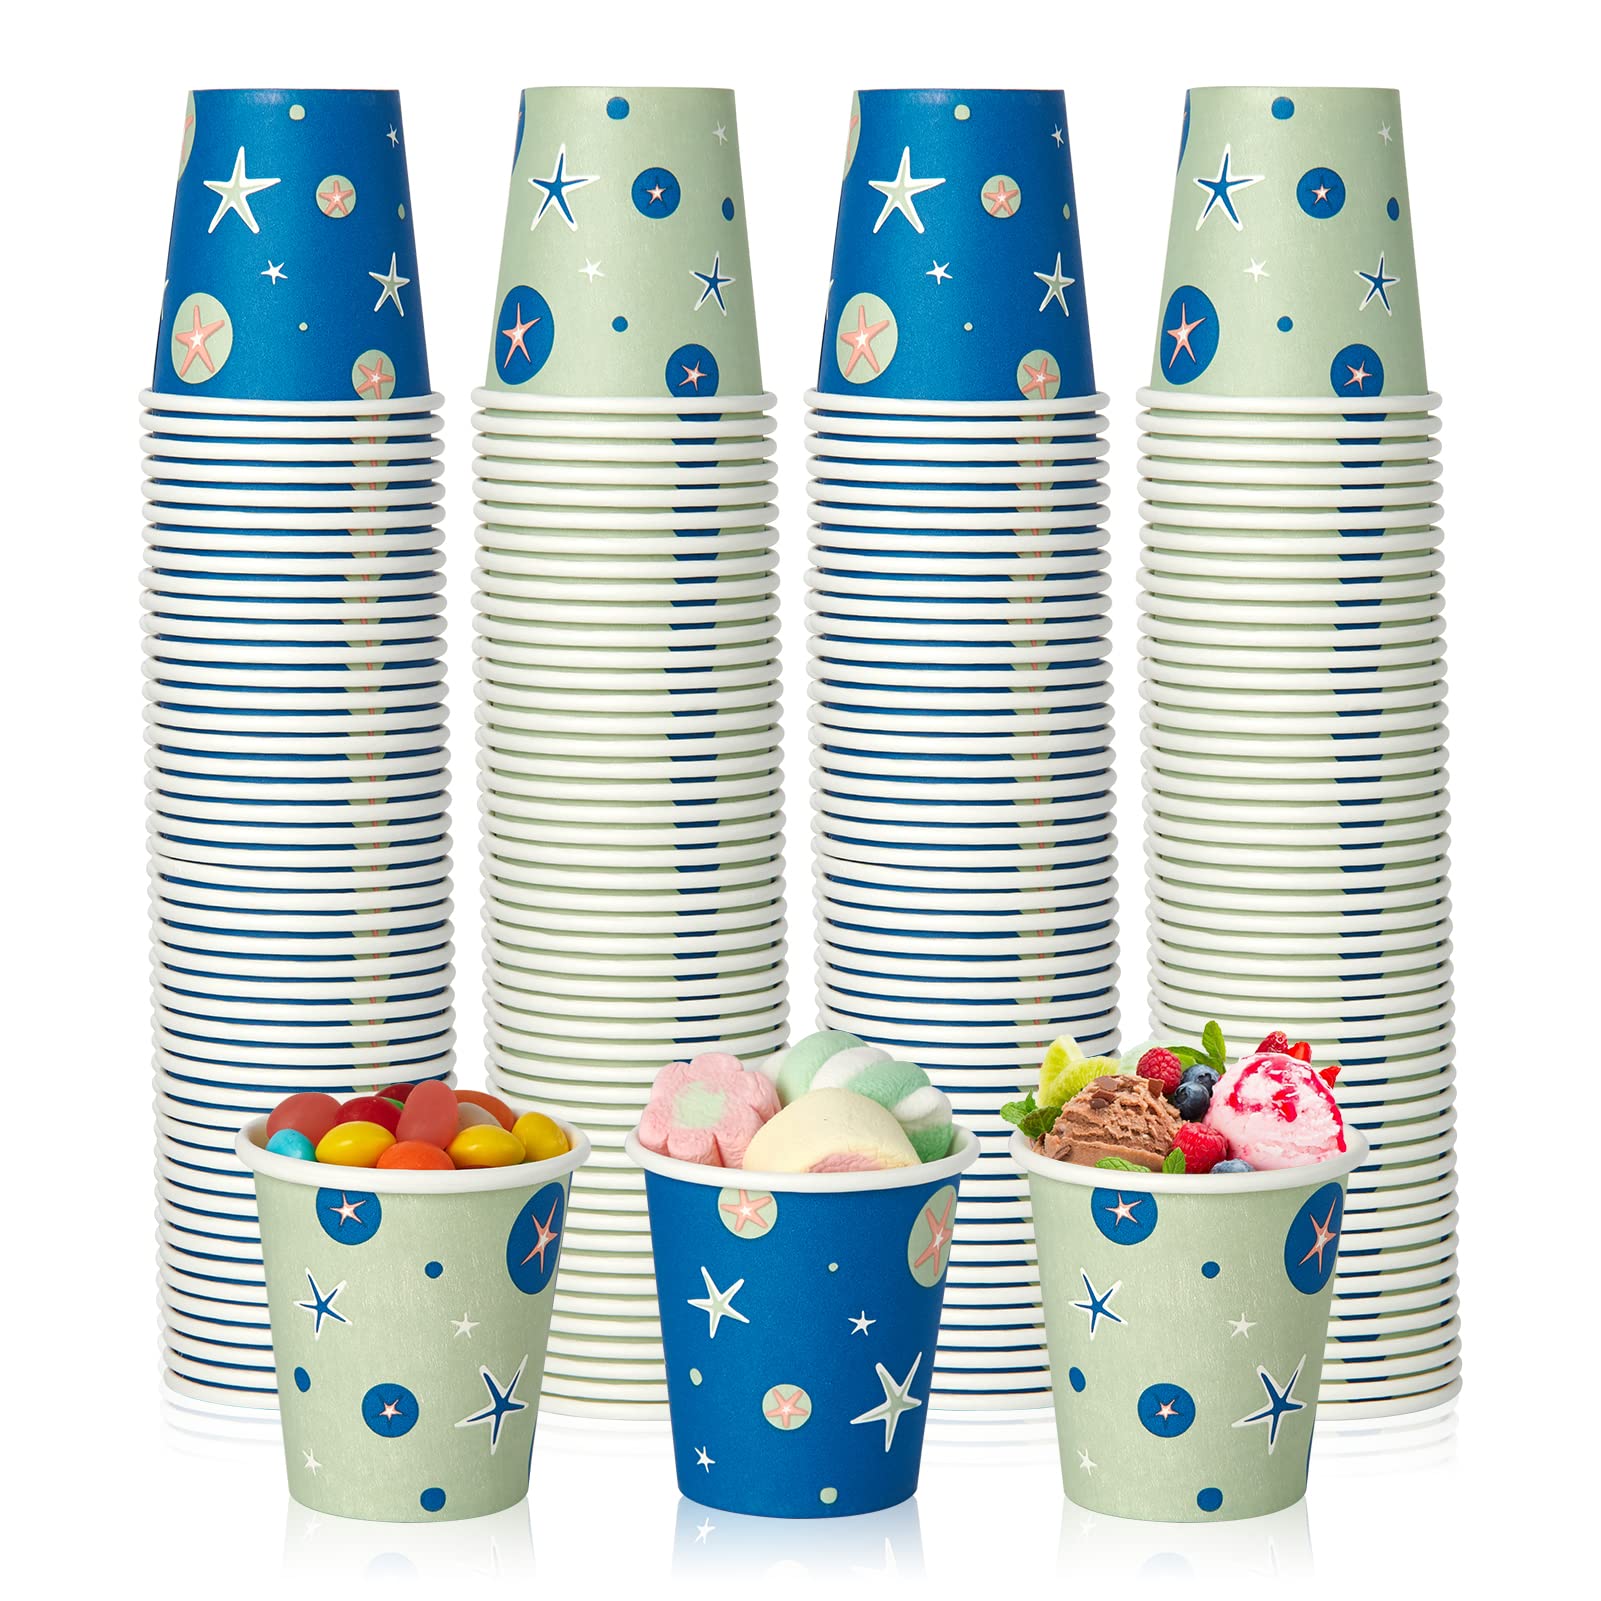 TV TOPVALUE 600pack 3oz Disposable Paper Cups Colorful Paper Bathroom Cups  Small Mouthwash Cups Espresso Cups Snack Cups for Party Picnic Travel and  Events 3OZ-Green and Blue